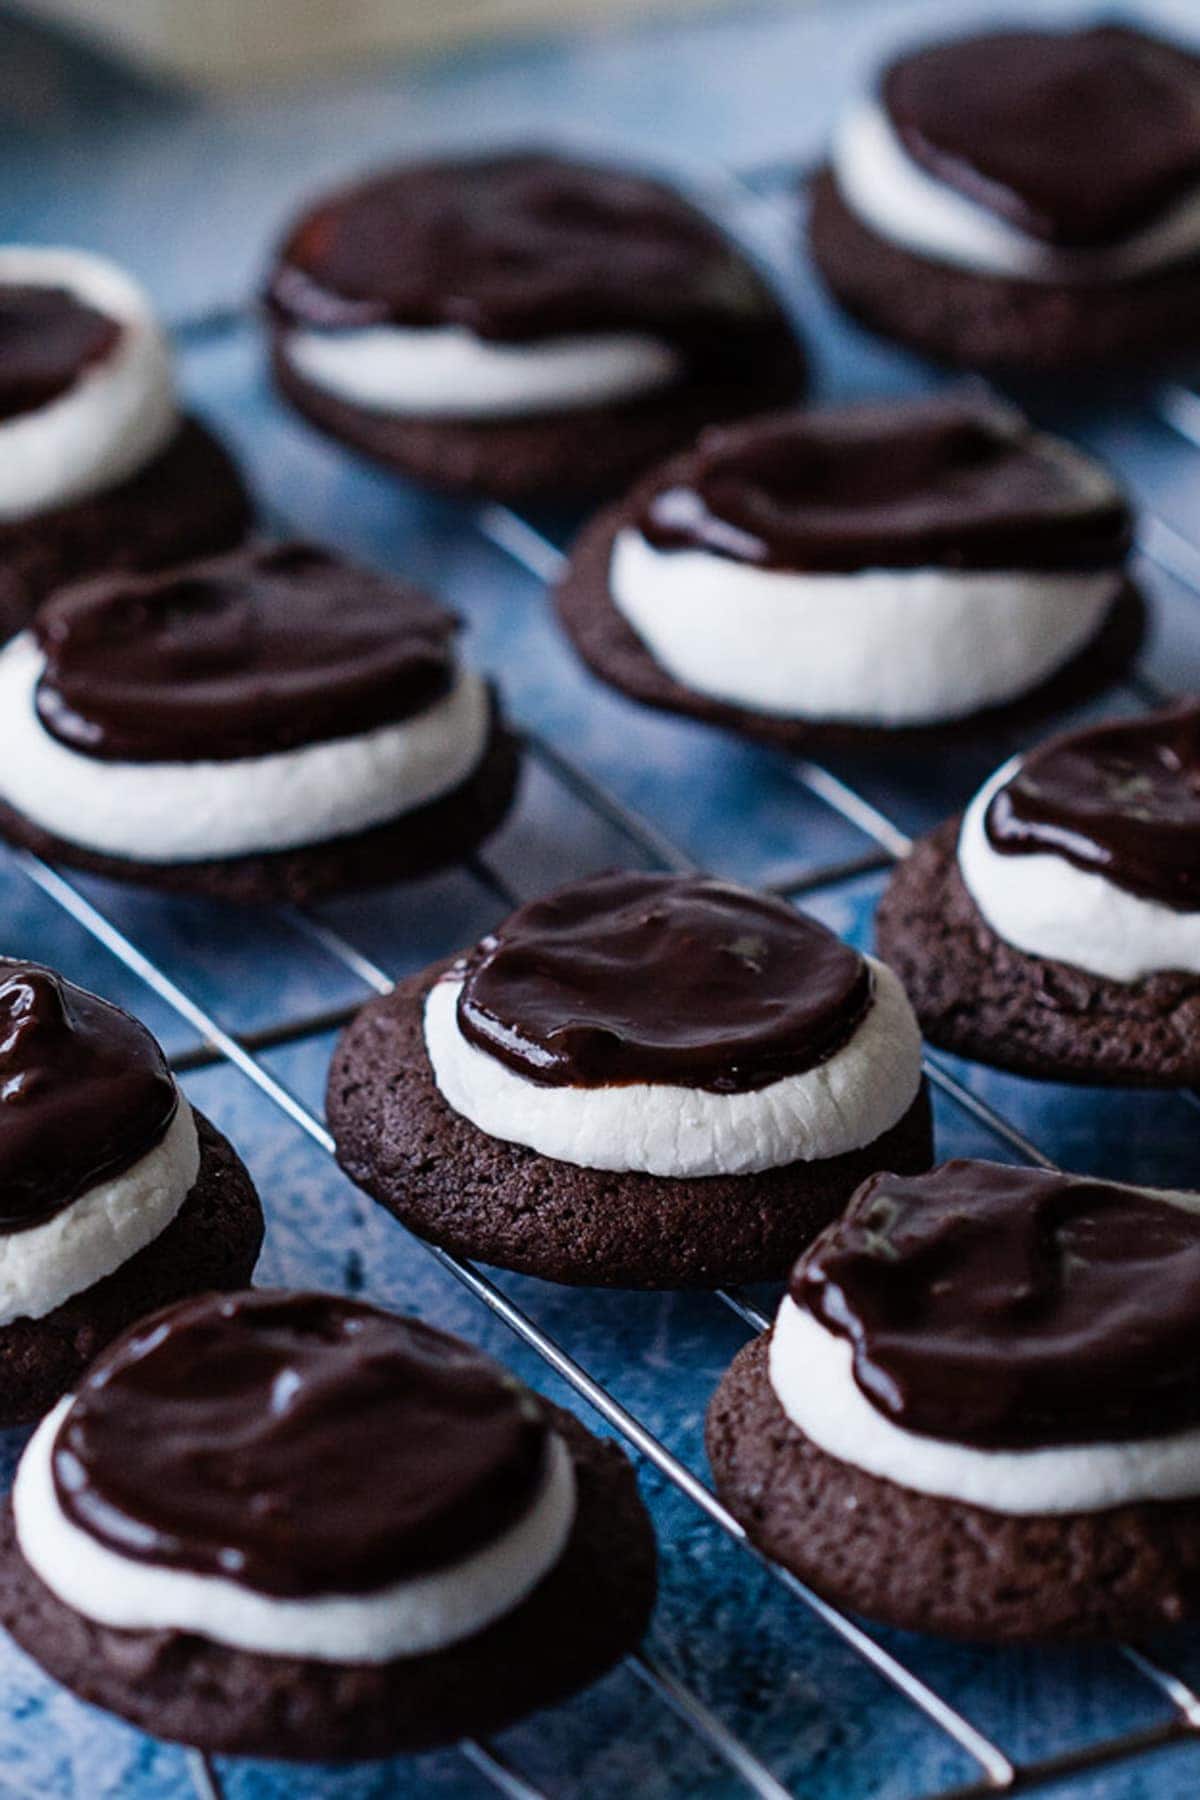 A close up of chocolate marshmallow cookies